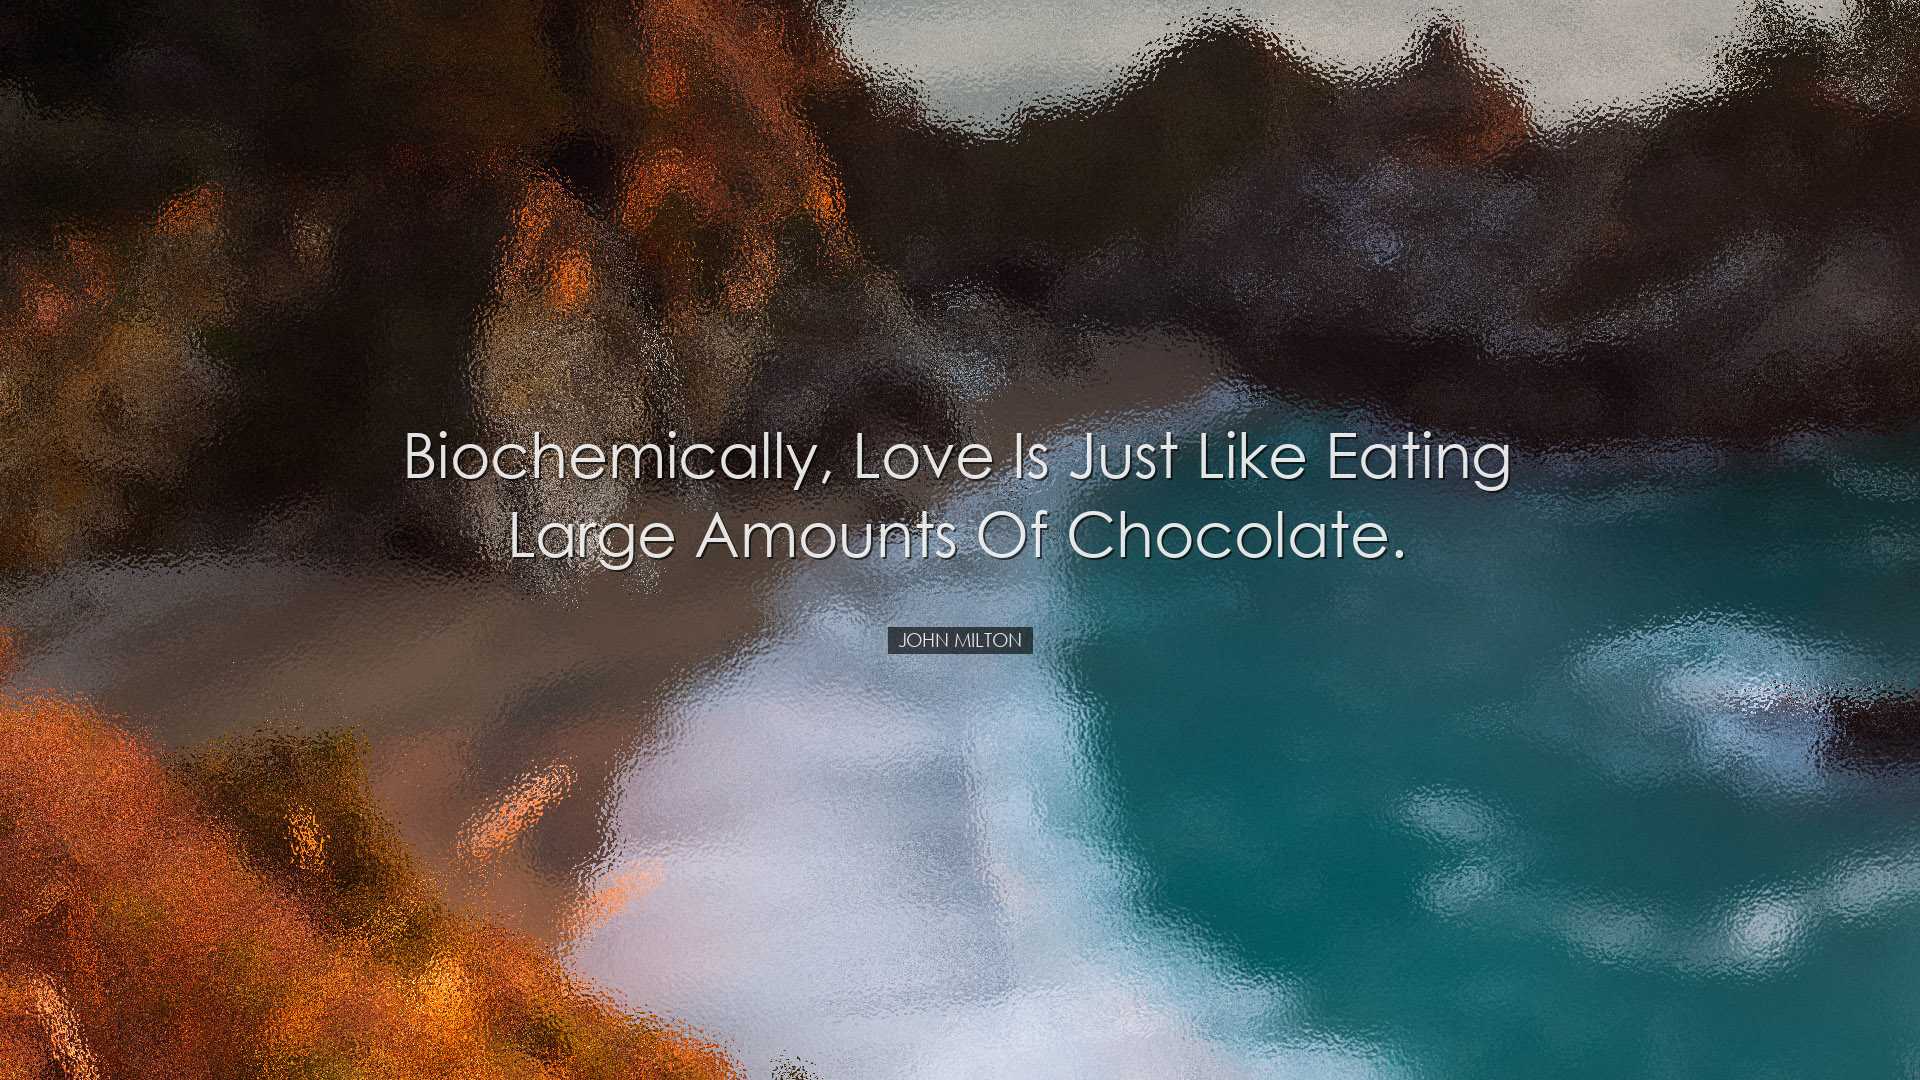 Biochemically, love is just like eating large amounts of chocolate